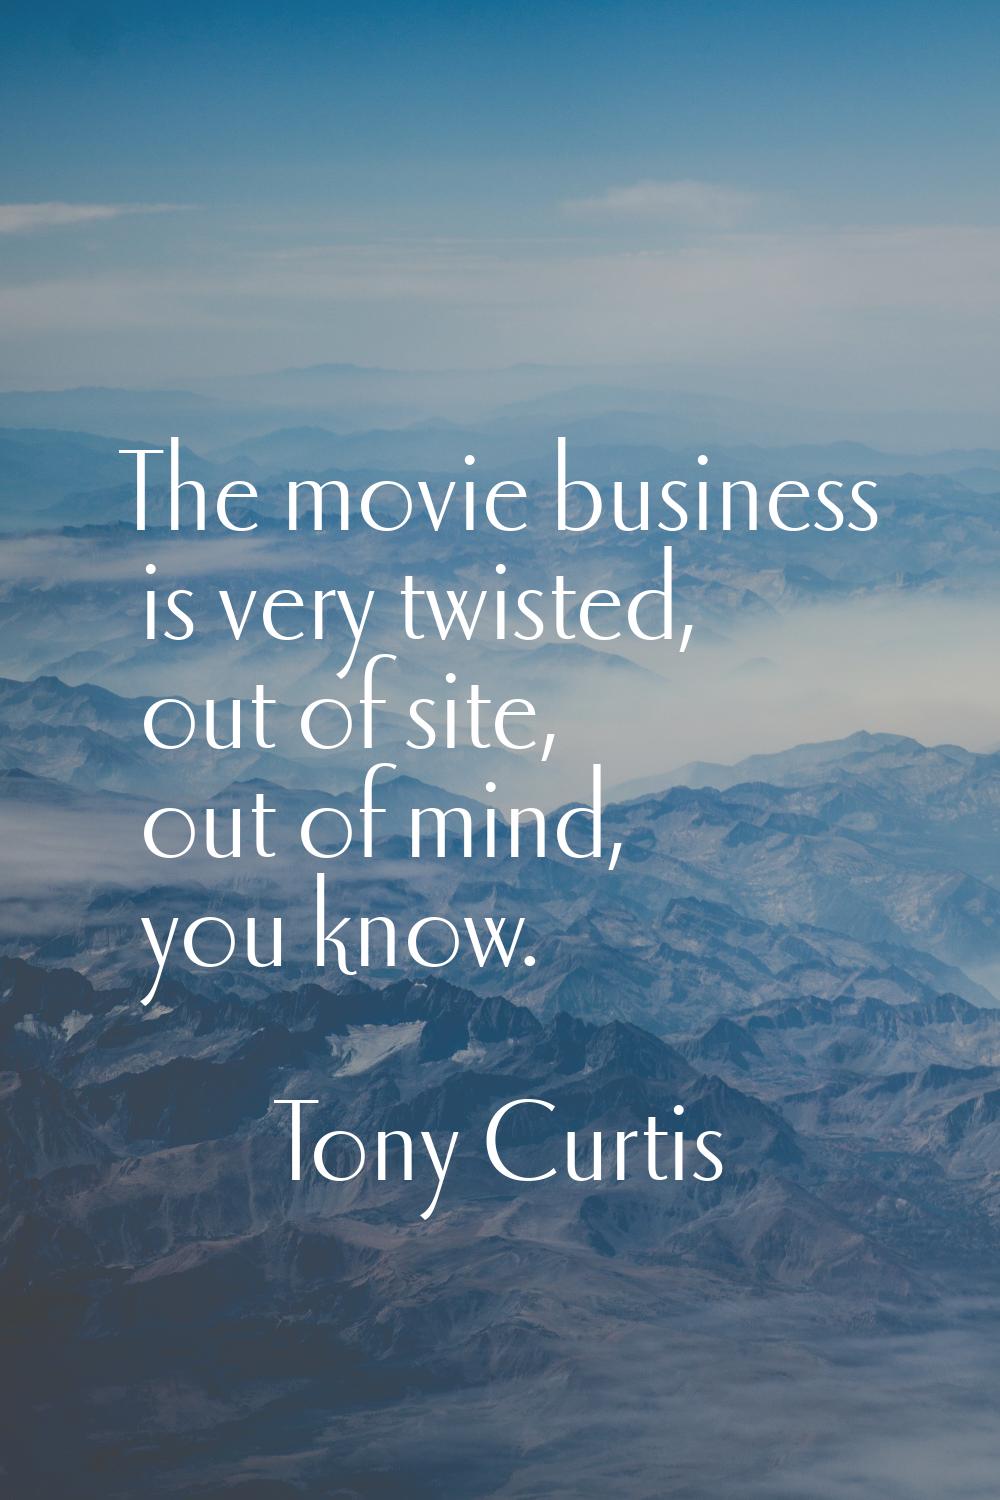 The movie business is very twisted, out of site, out of mind, you know.